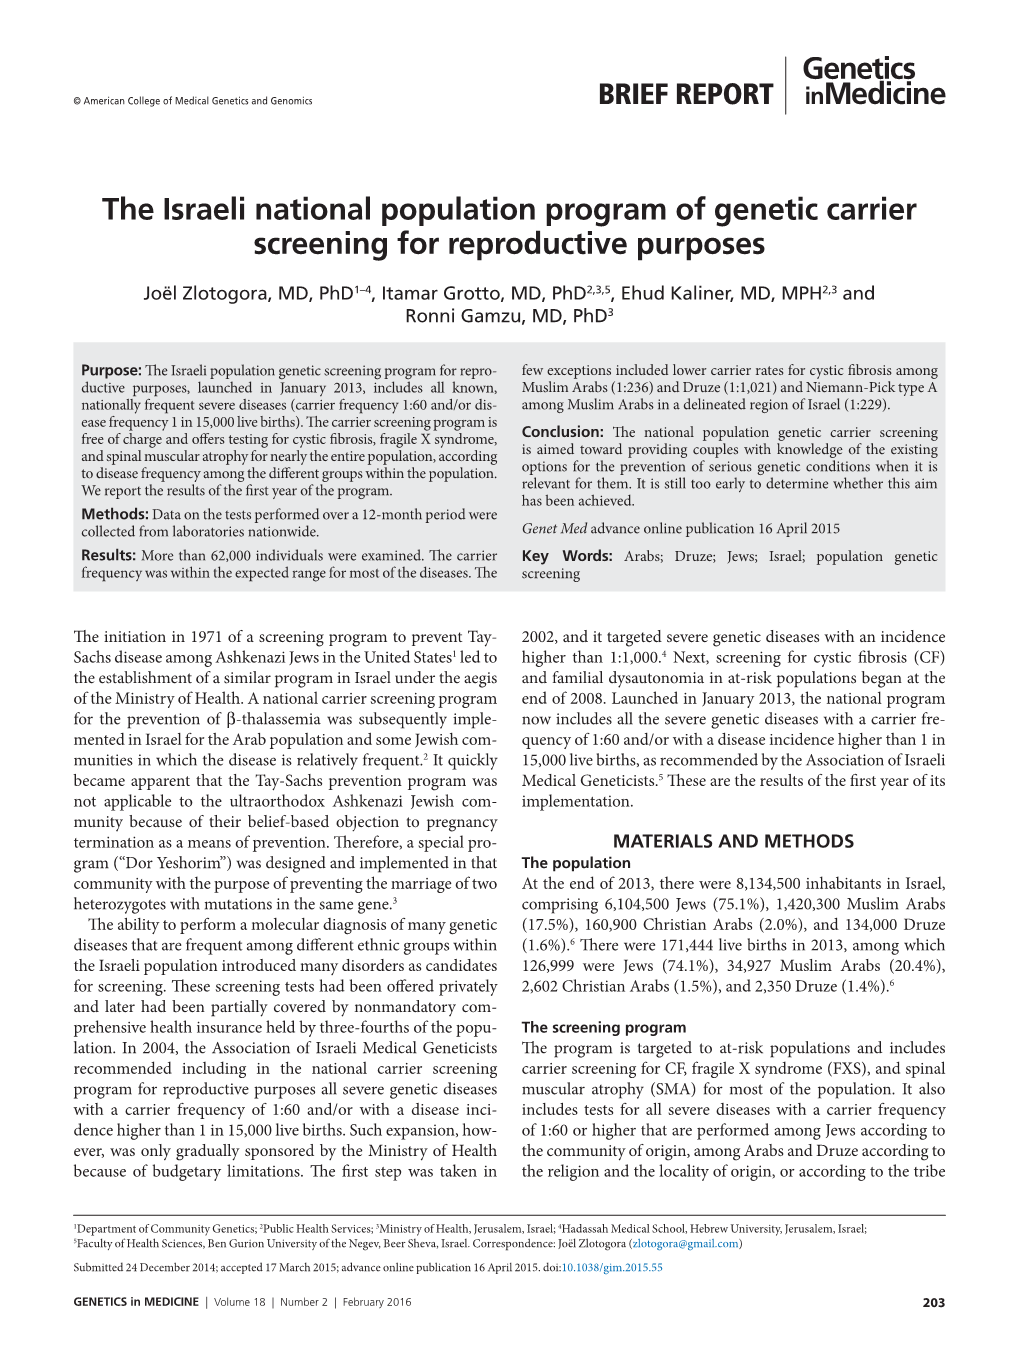 The Israeli National Population Program of Genetic Carrier Screening for Reproductive Purposes